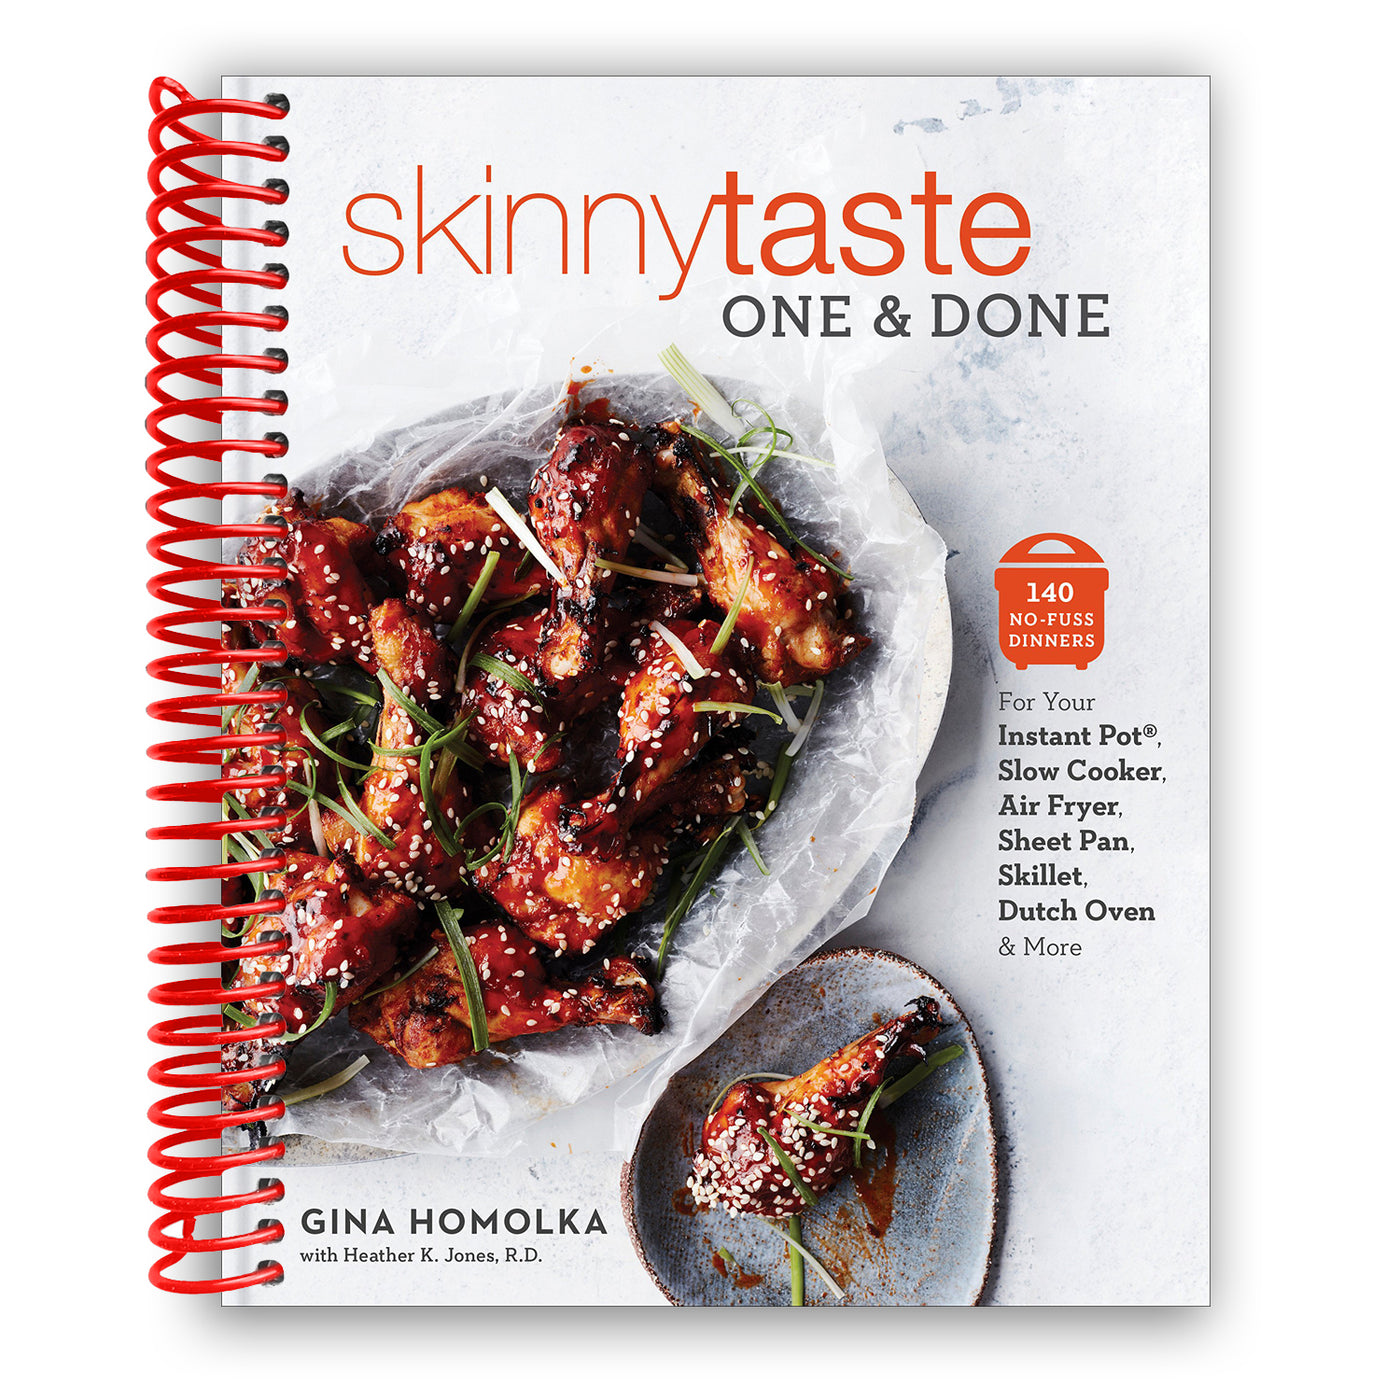 Skinnytaste One and Done: 140 No-Fuss Dinners for Your Instant Pot®, Air Fryer, Sheet Pan, Skillet, and Dutch Oven(Spiral Bound)